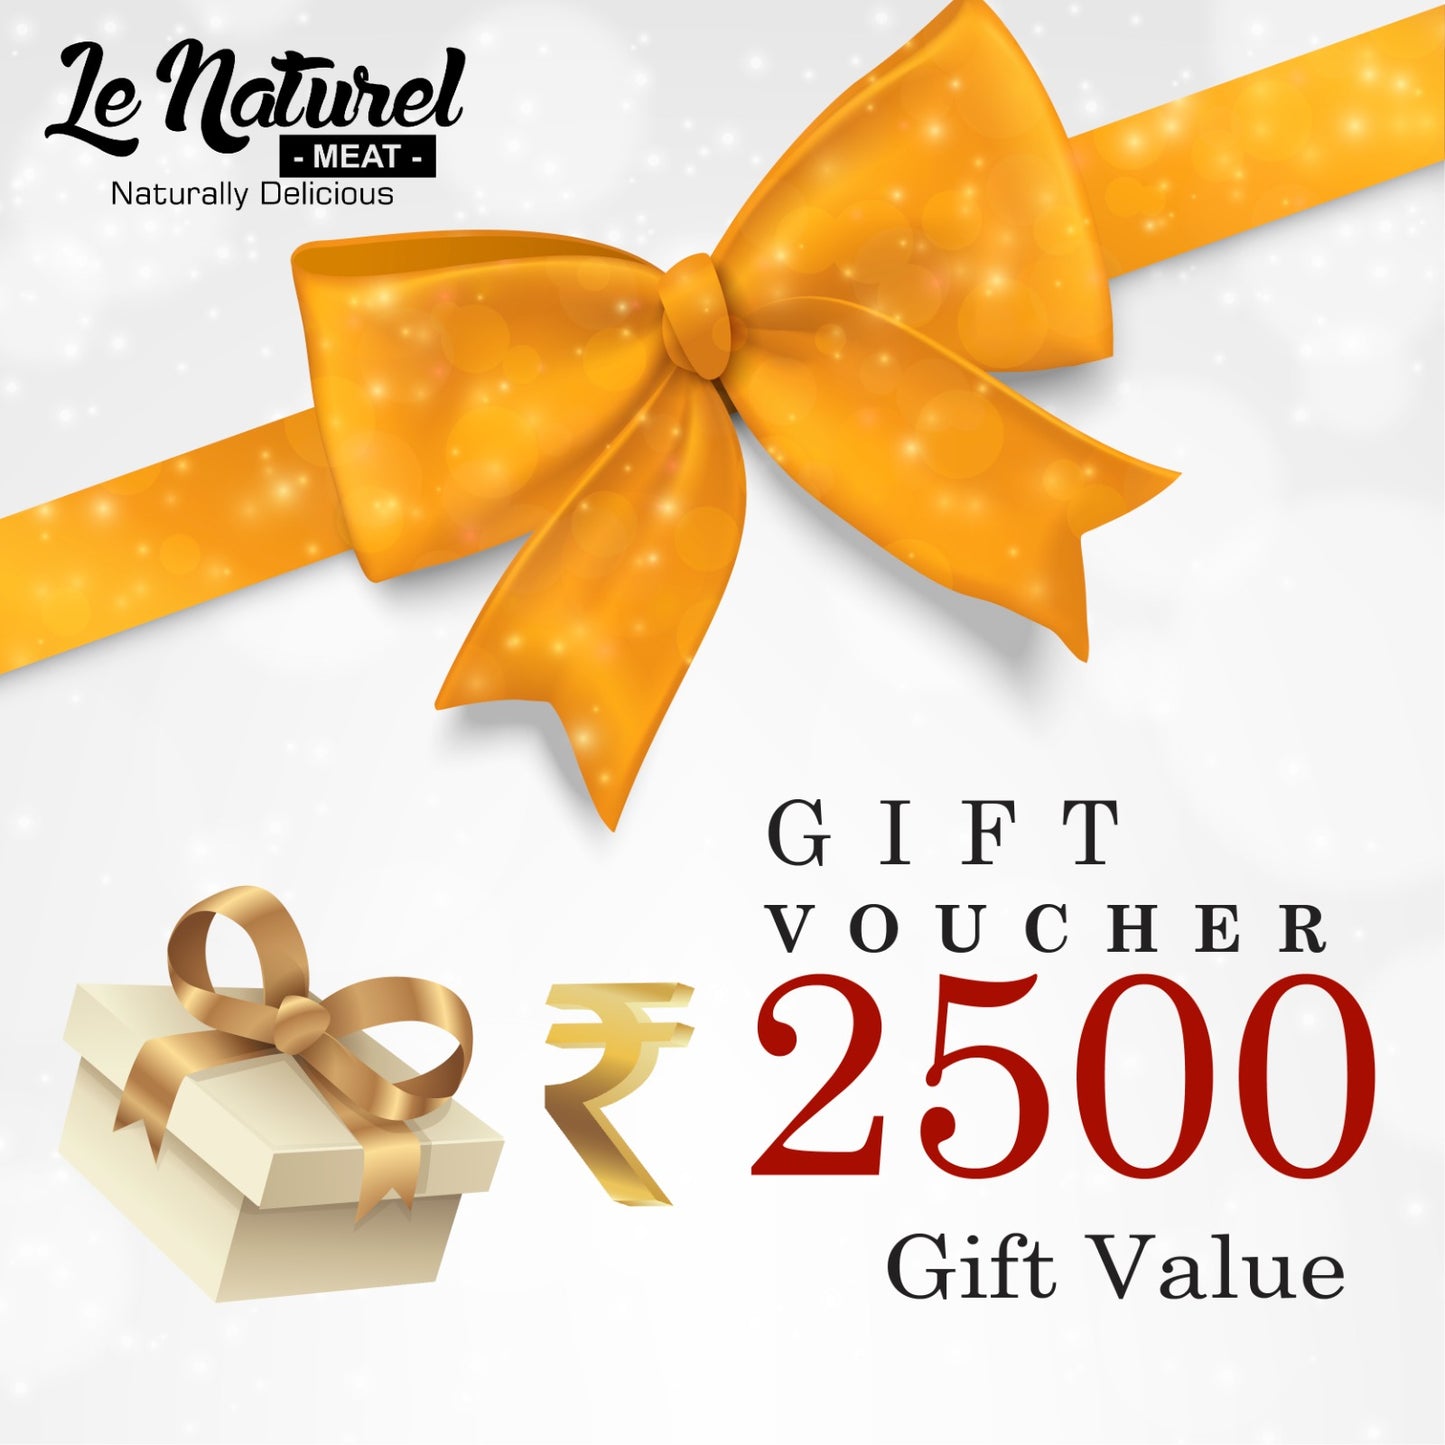 Le Naturel Gift Card Available Worth Rs. 1000 / Rs. 2000 / Rs. 5000